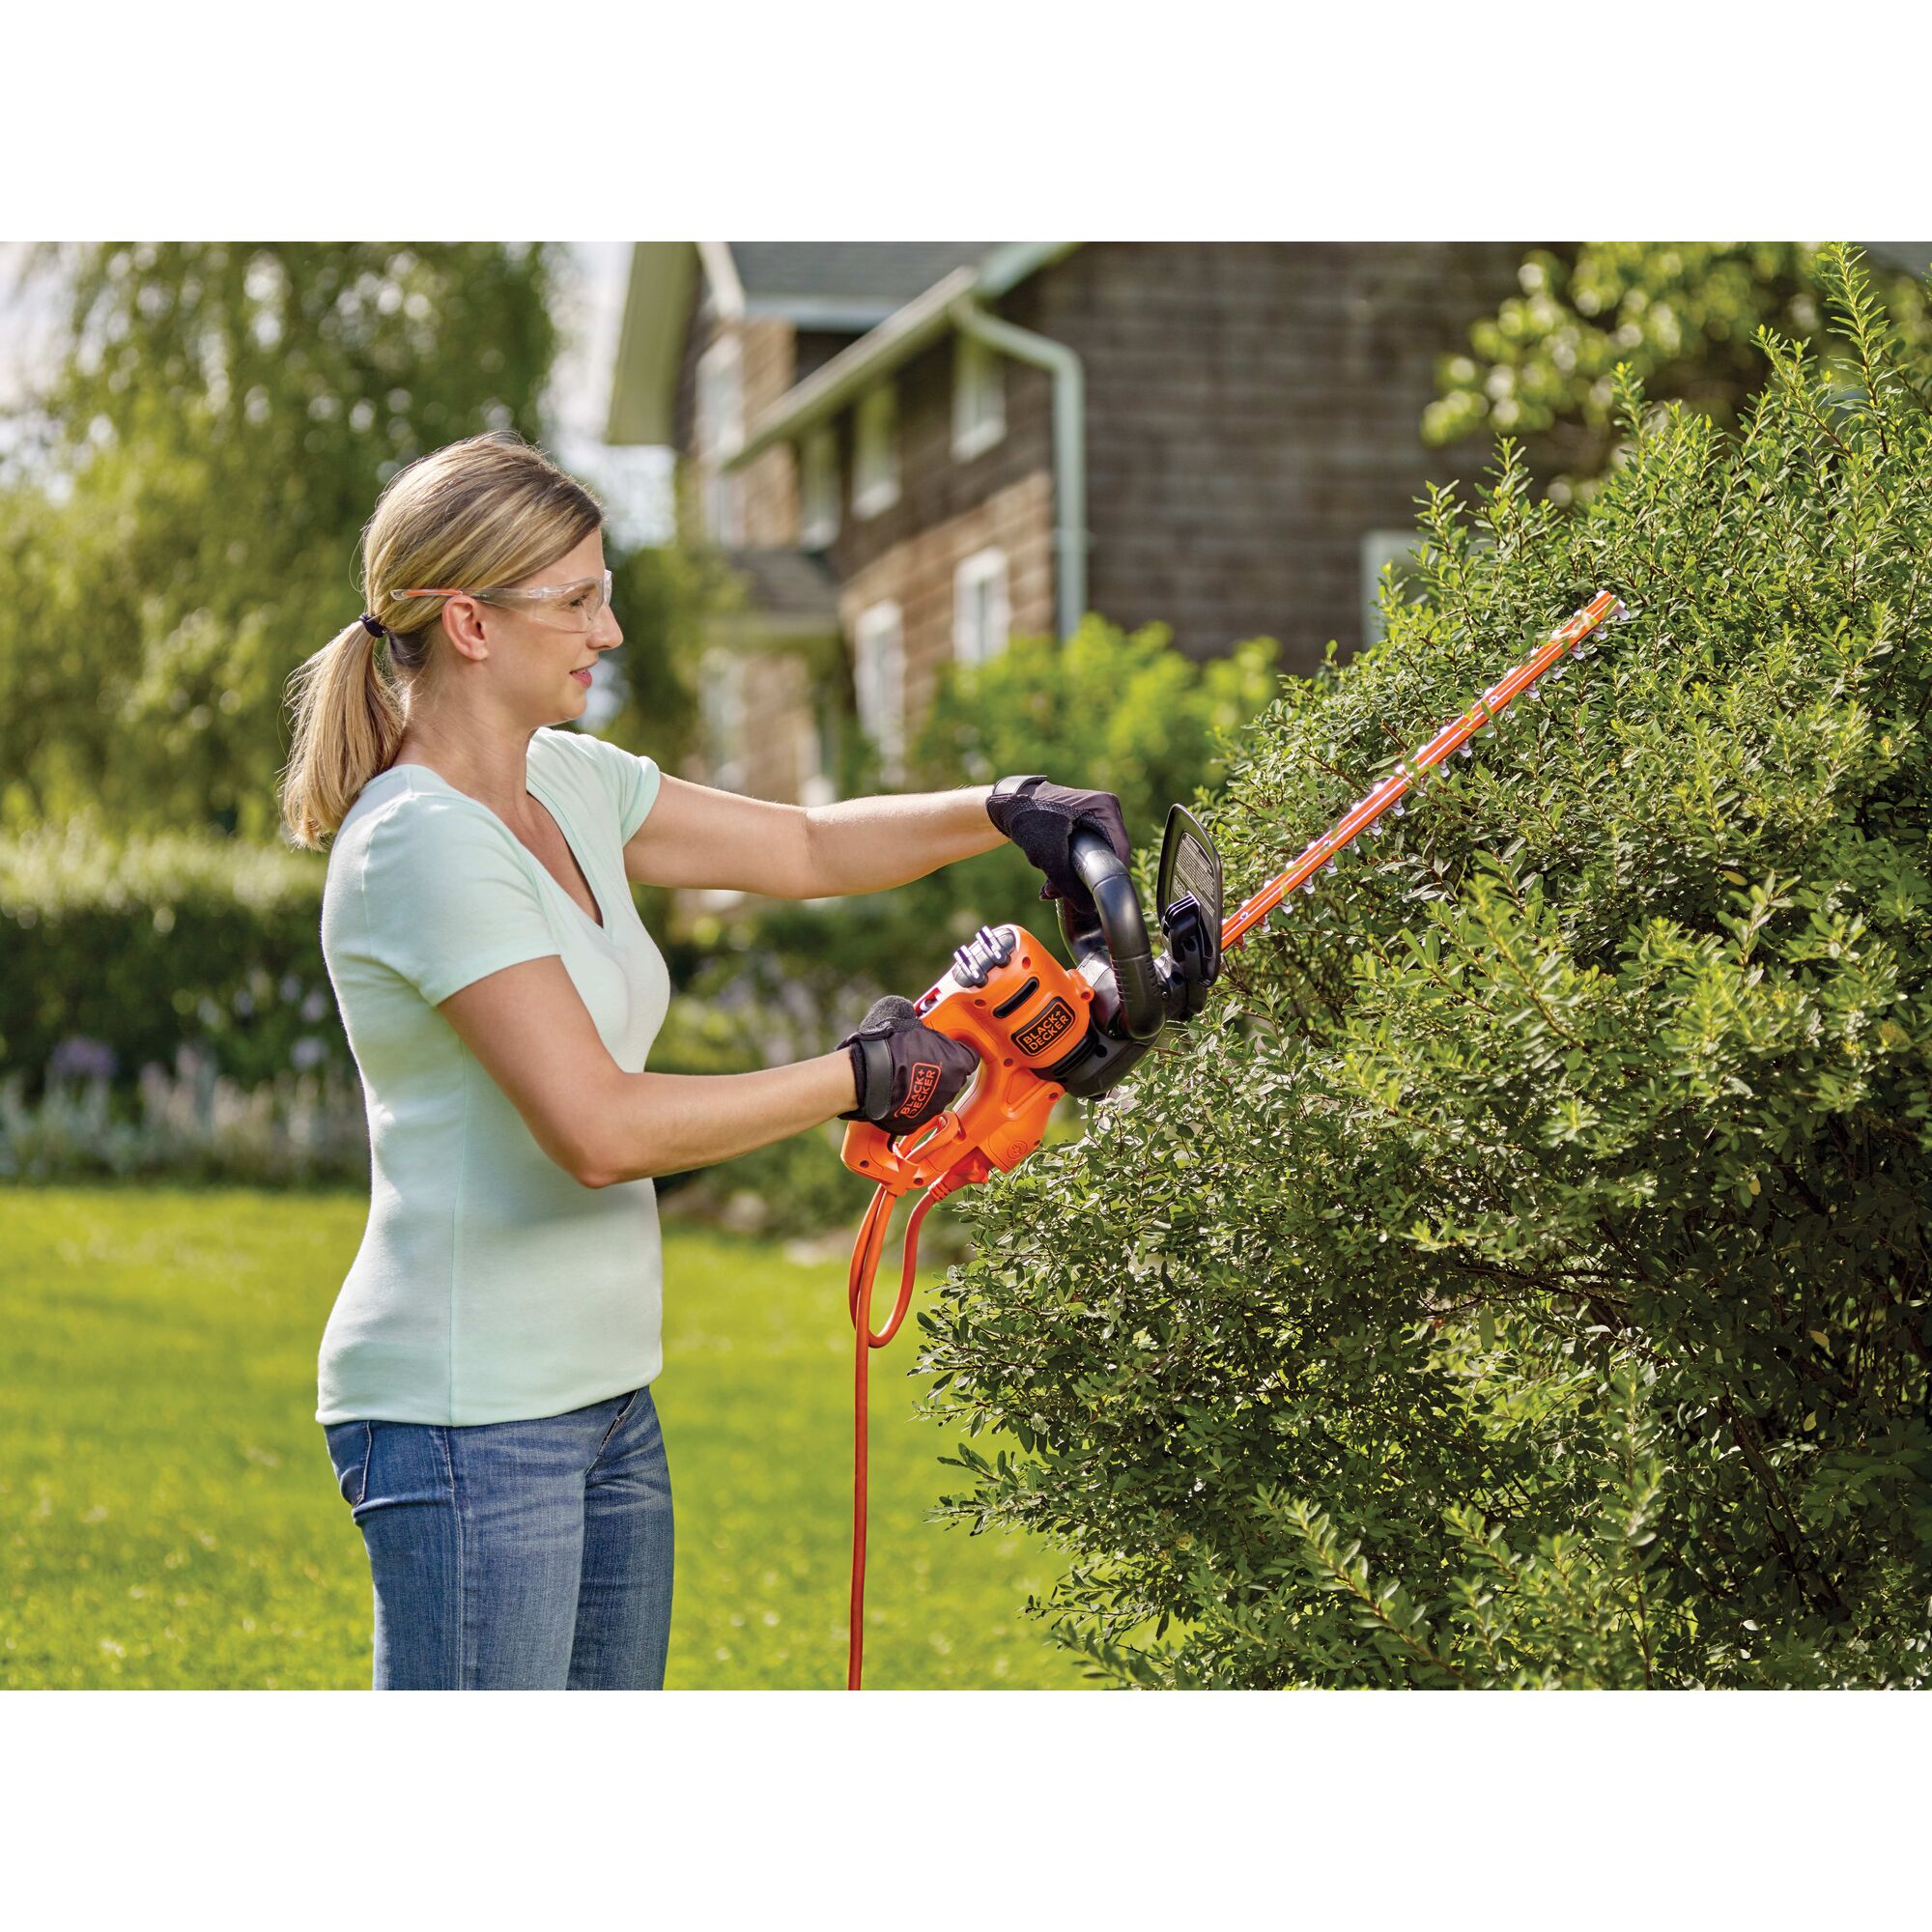 18 inch Electric hedge trimmer being used by a person to trim bushes.